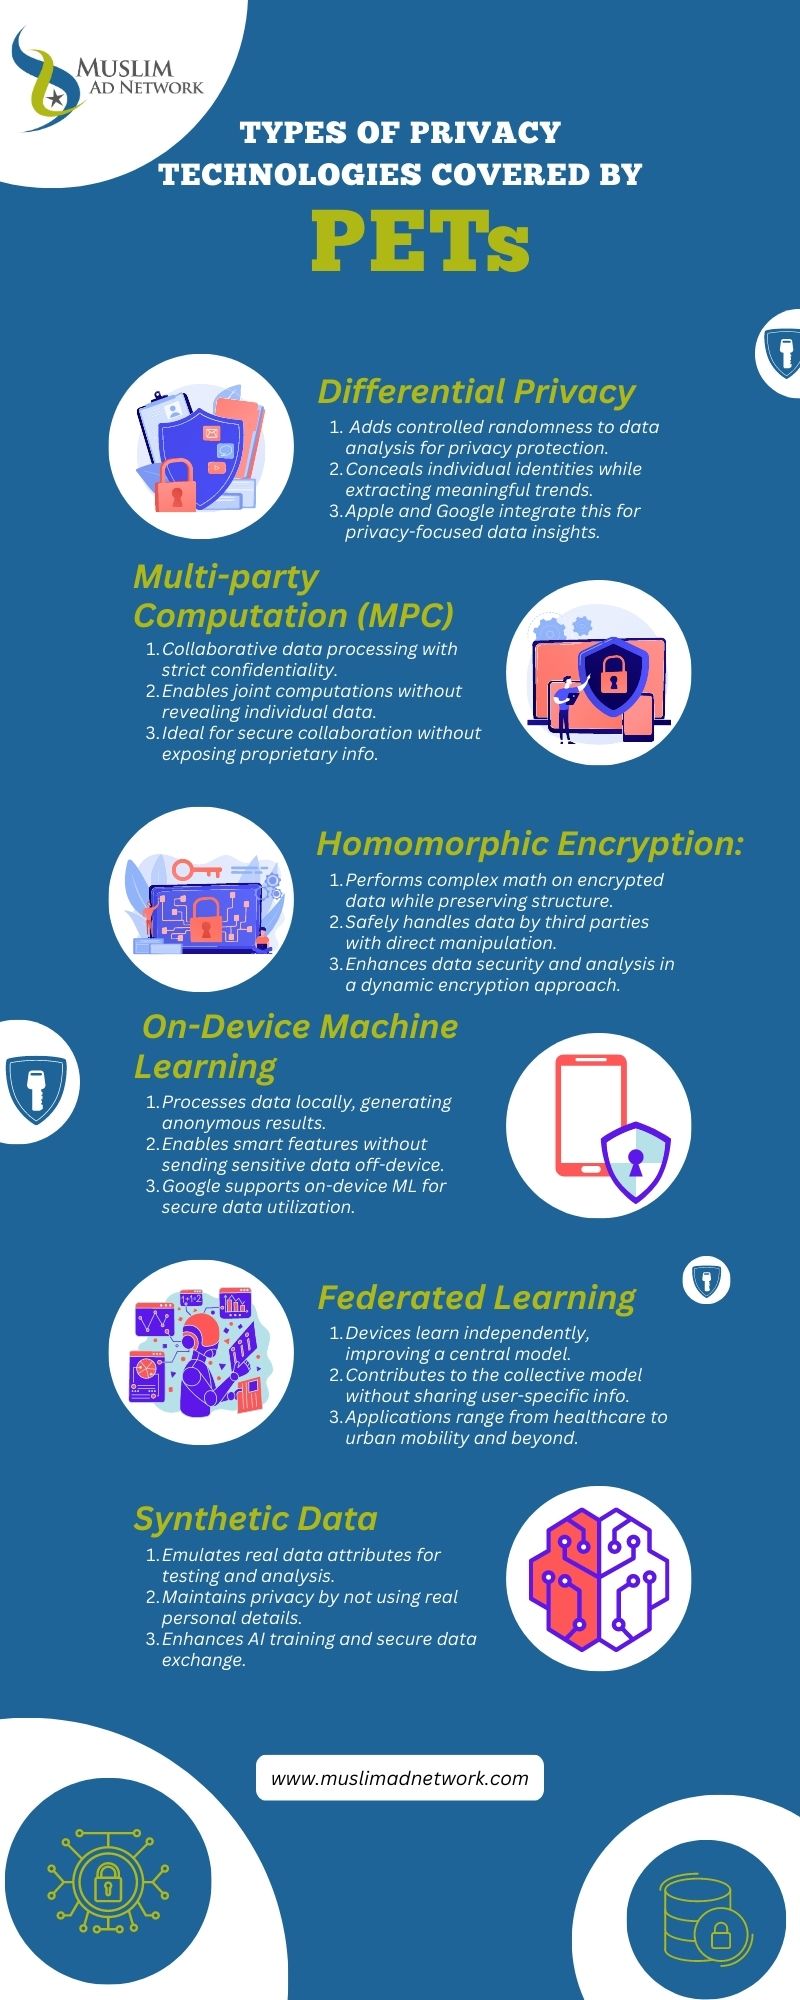 Types of Privacy Enhancing Technology uses.